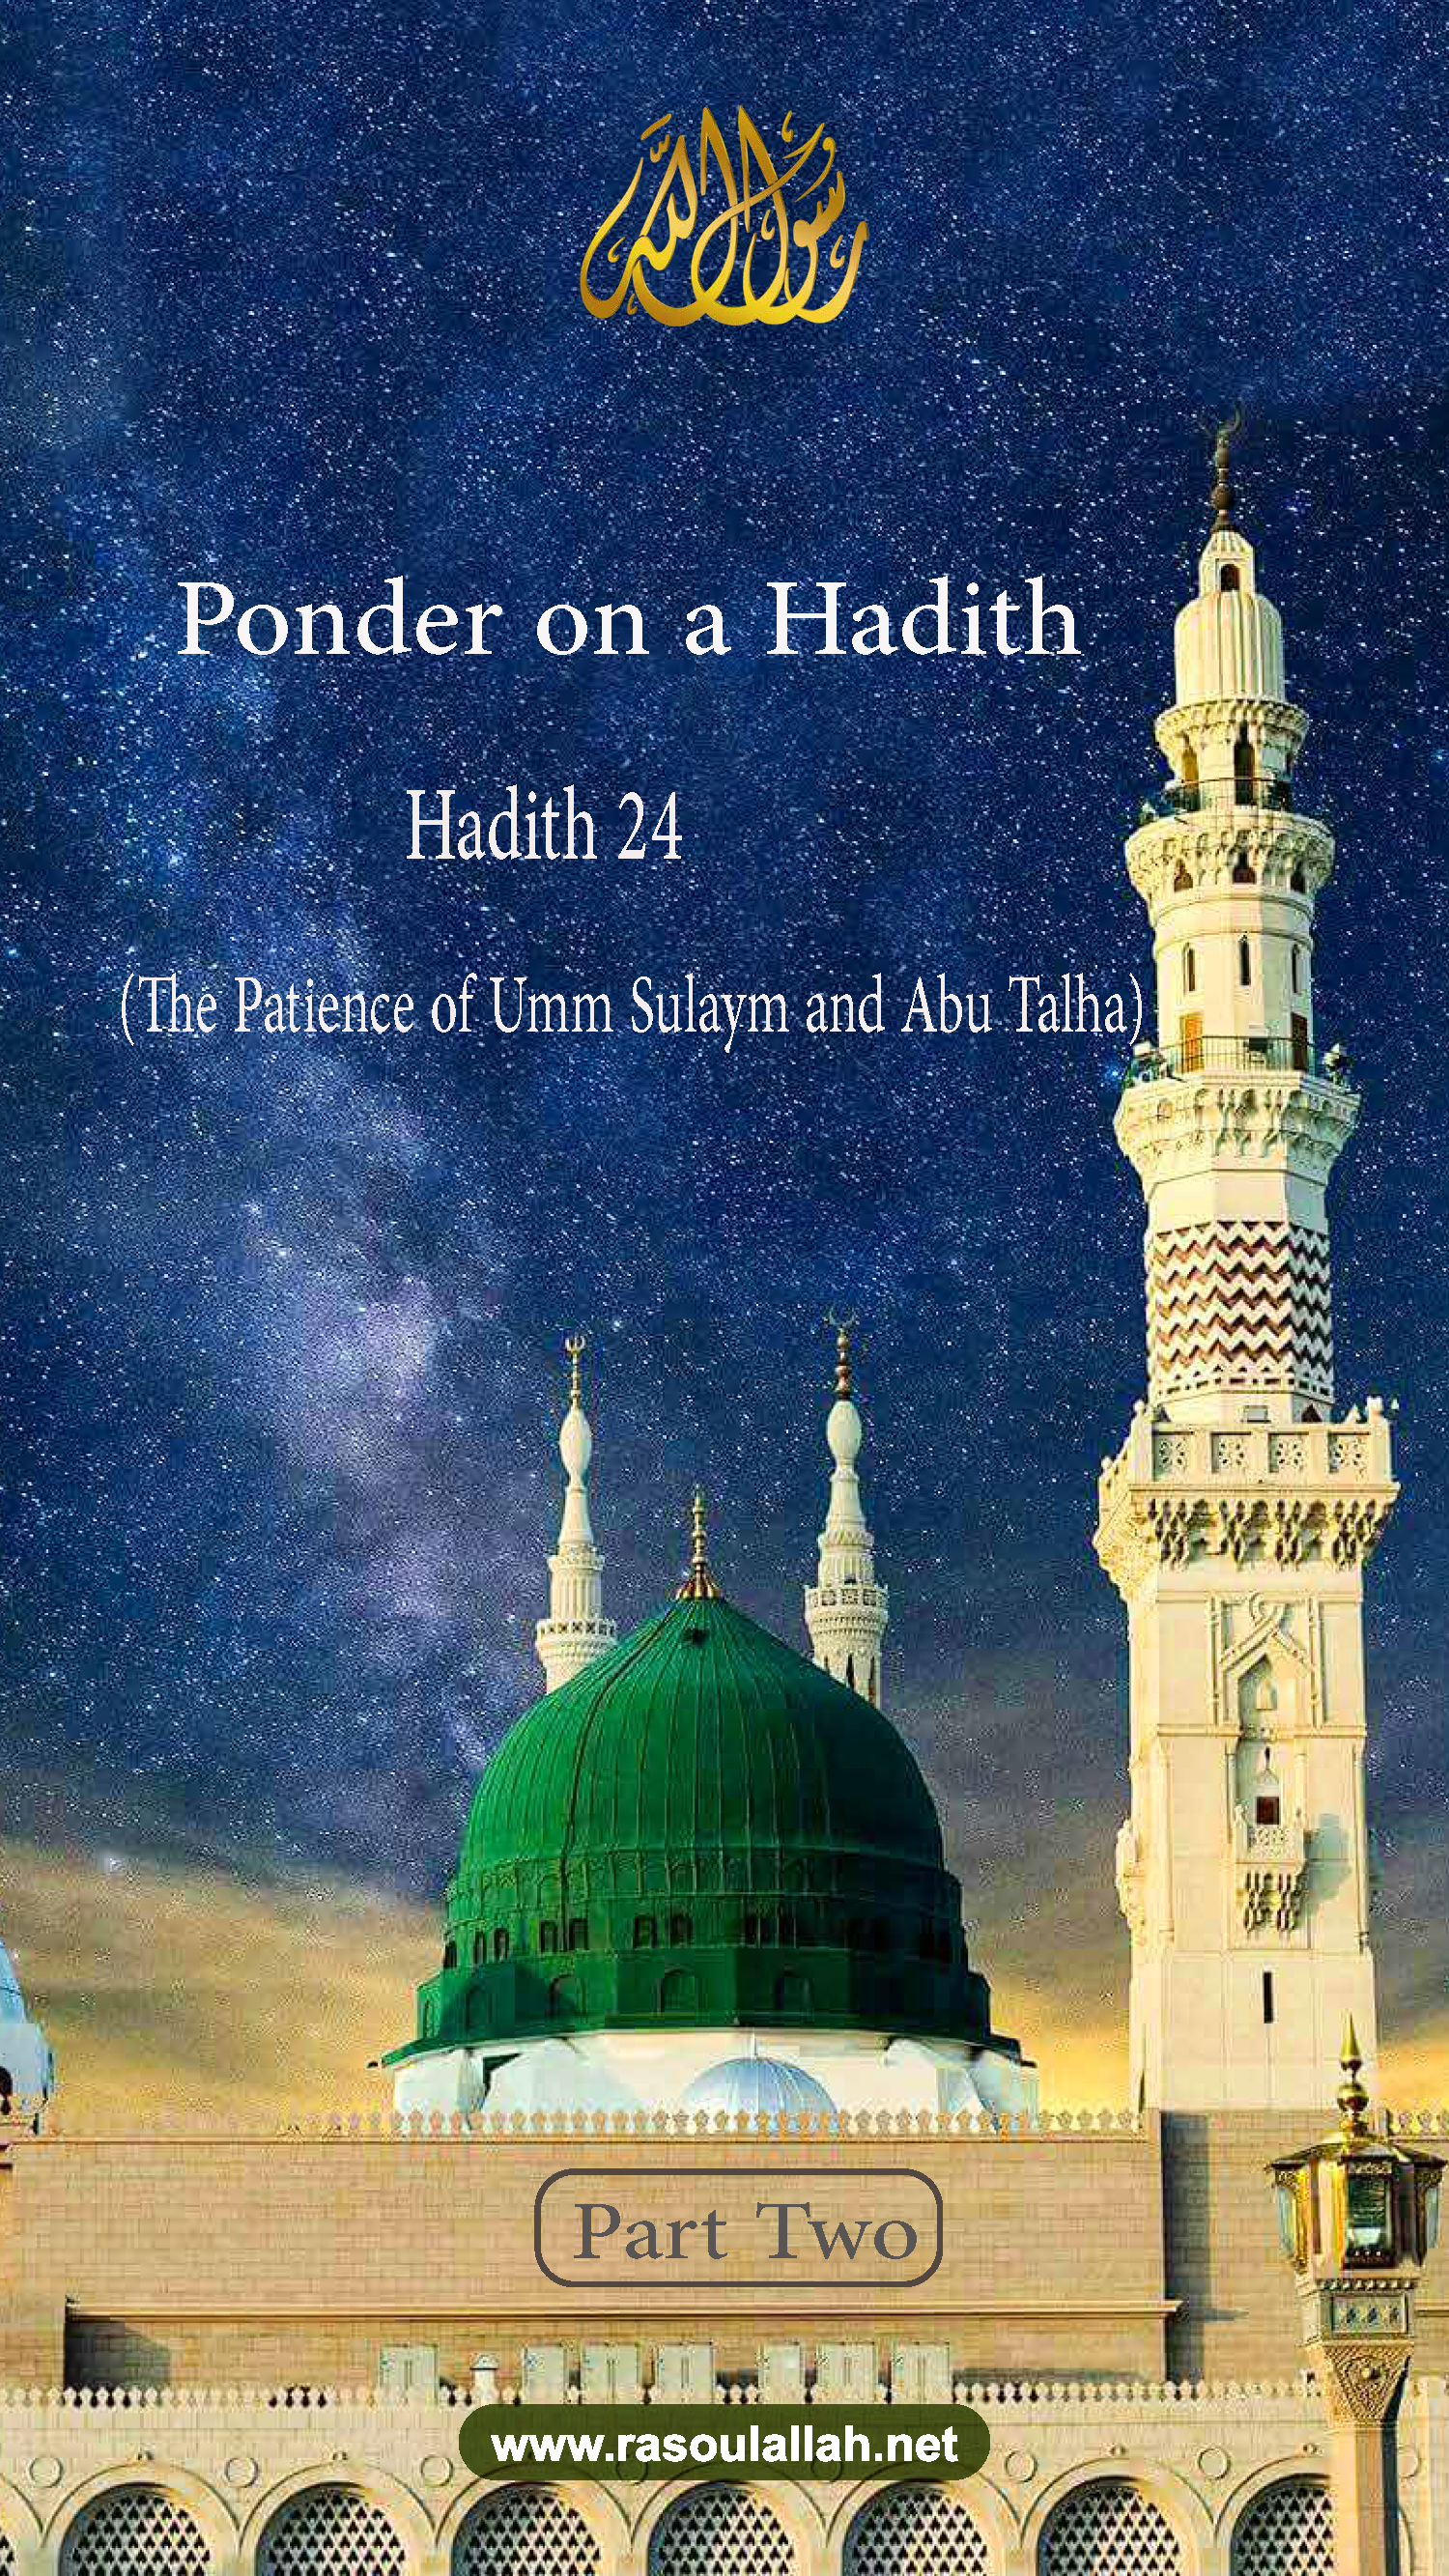 Hadith 24: (The Patience of Umm Sulaym and Abu Talha)